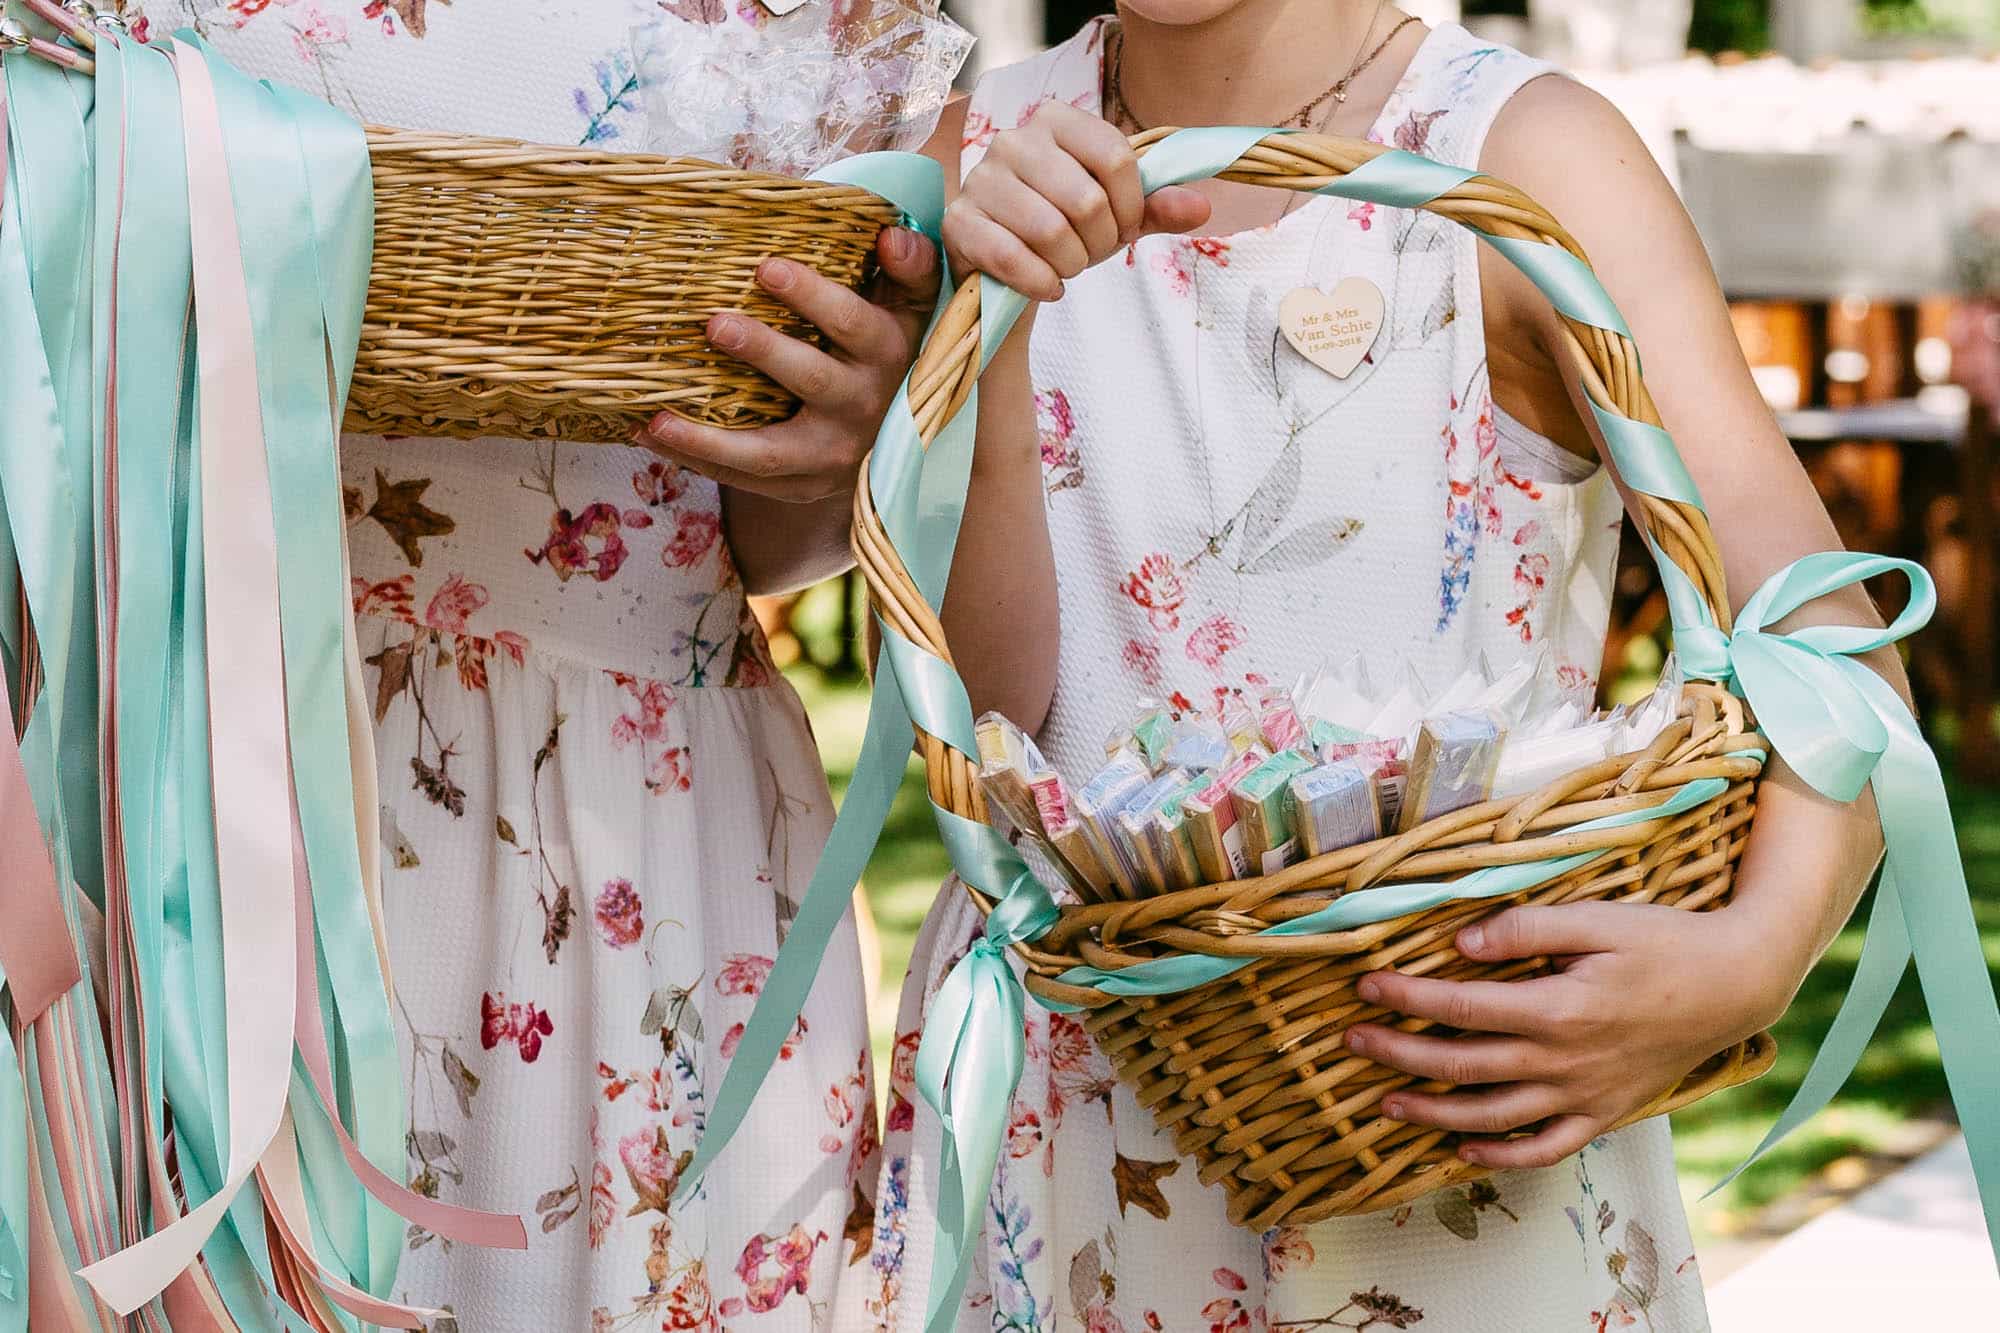 Two girls hold baskets with ribbons and corsages.